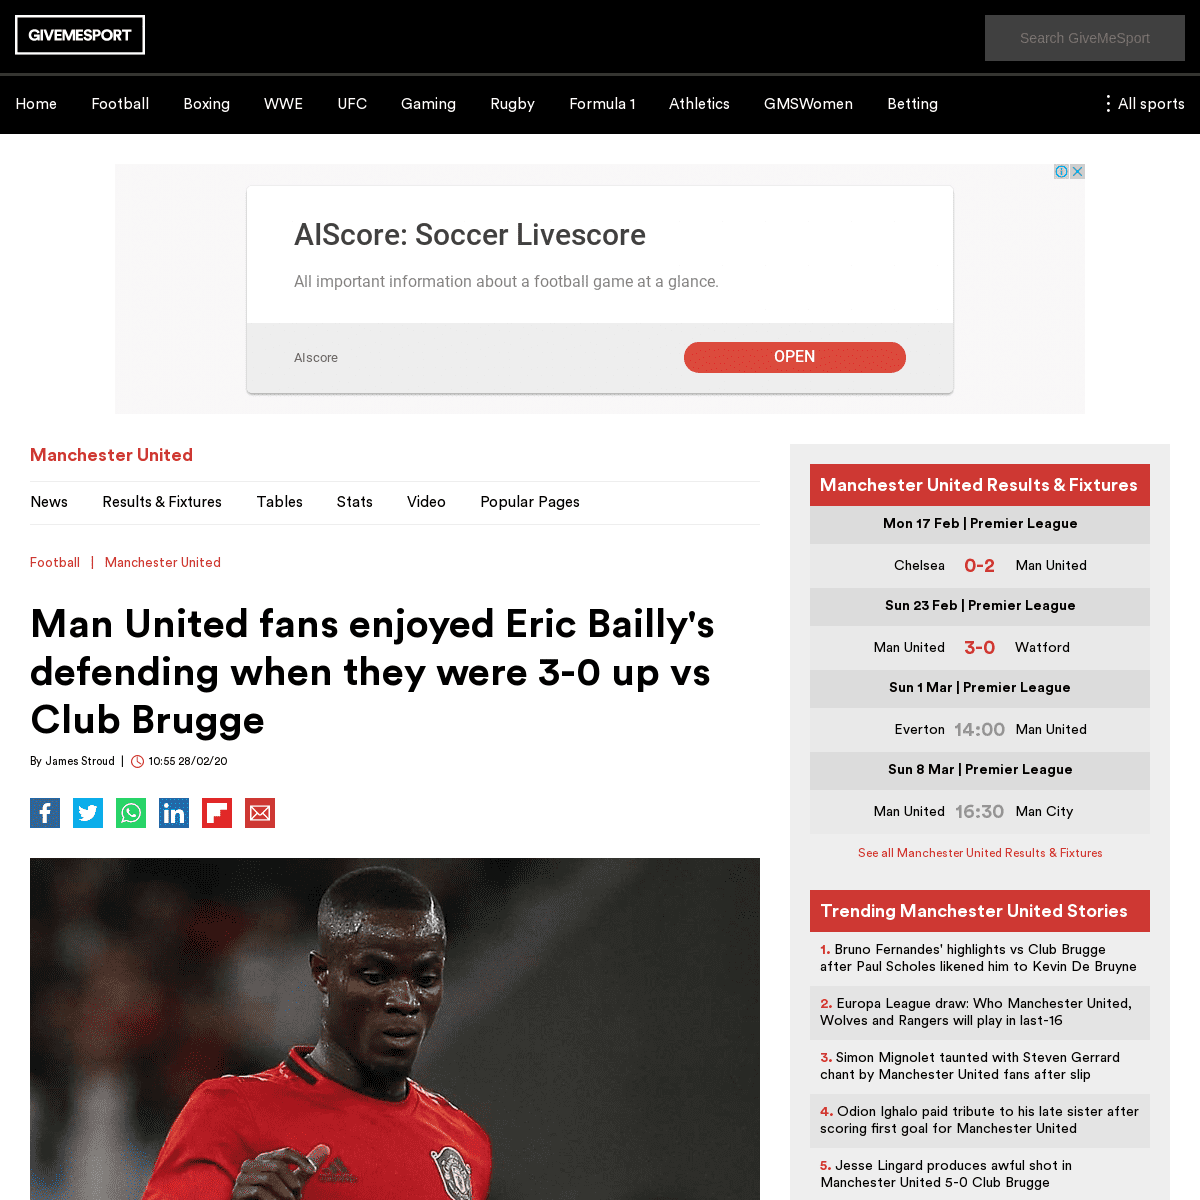 A complete backup of www.givemesport.com/1550755-man-united-fans-enjoyed-eric-baillys-defending-when-they-were-30-up-vs-club-bru